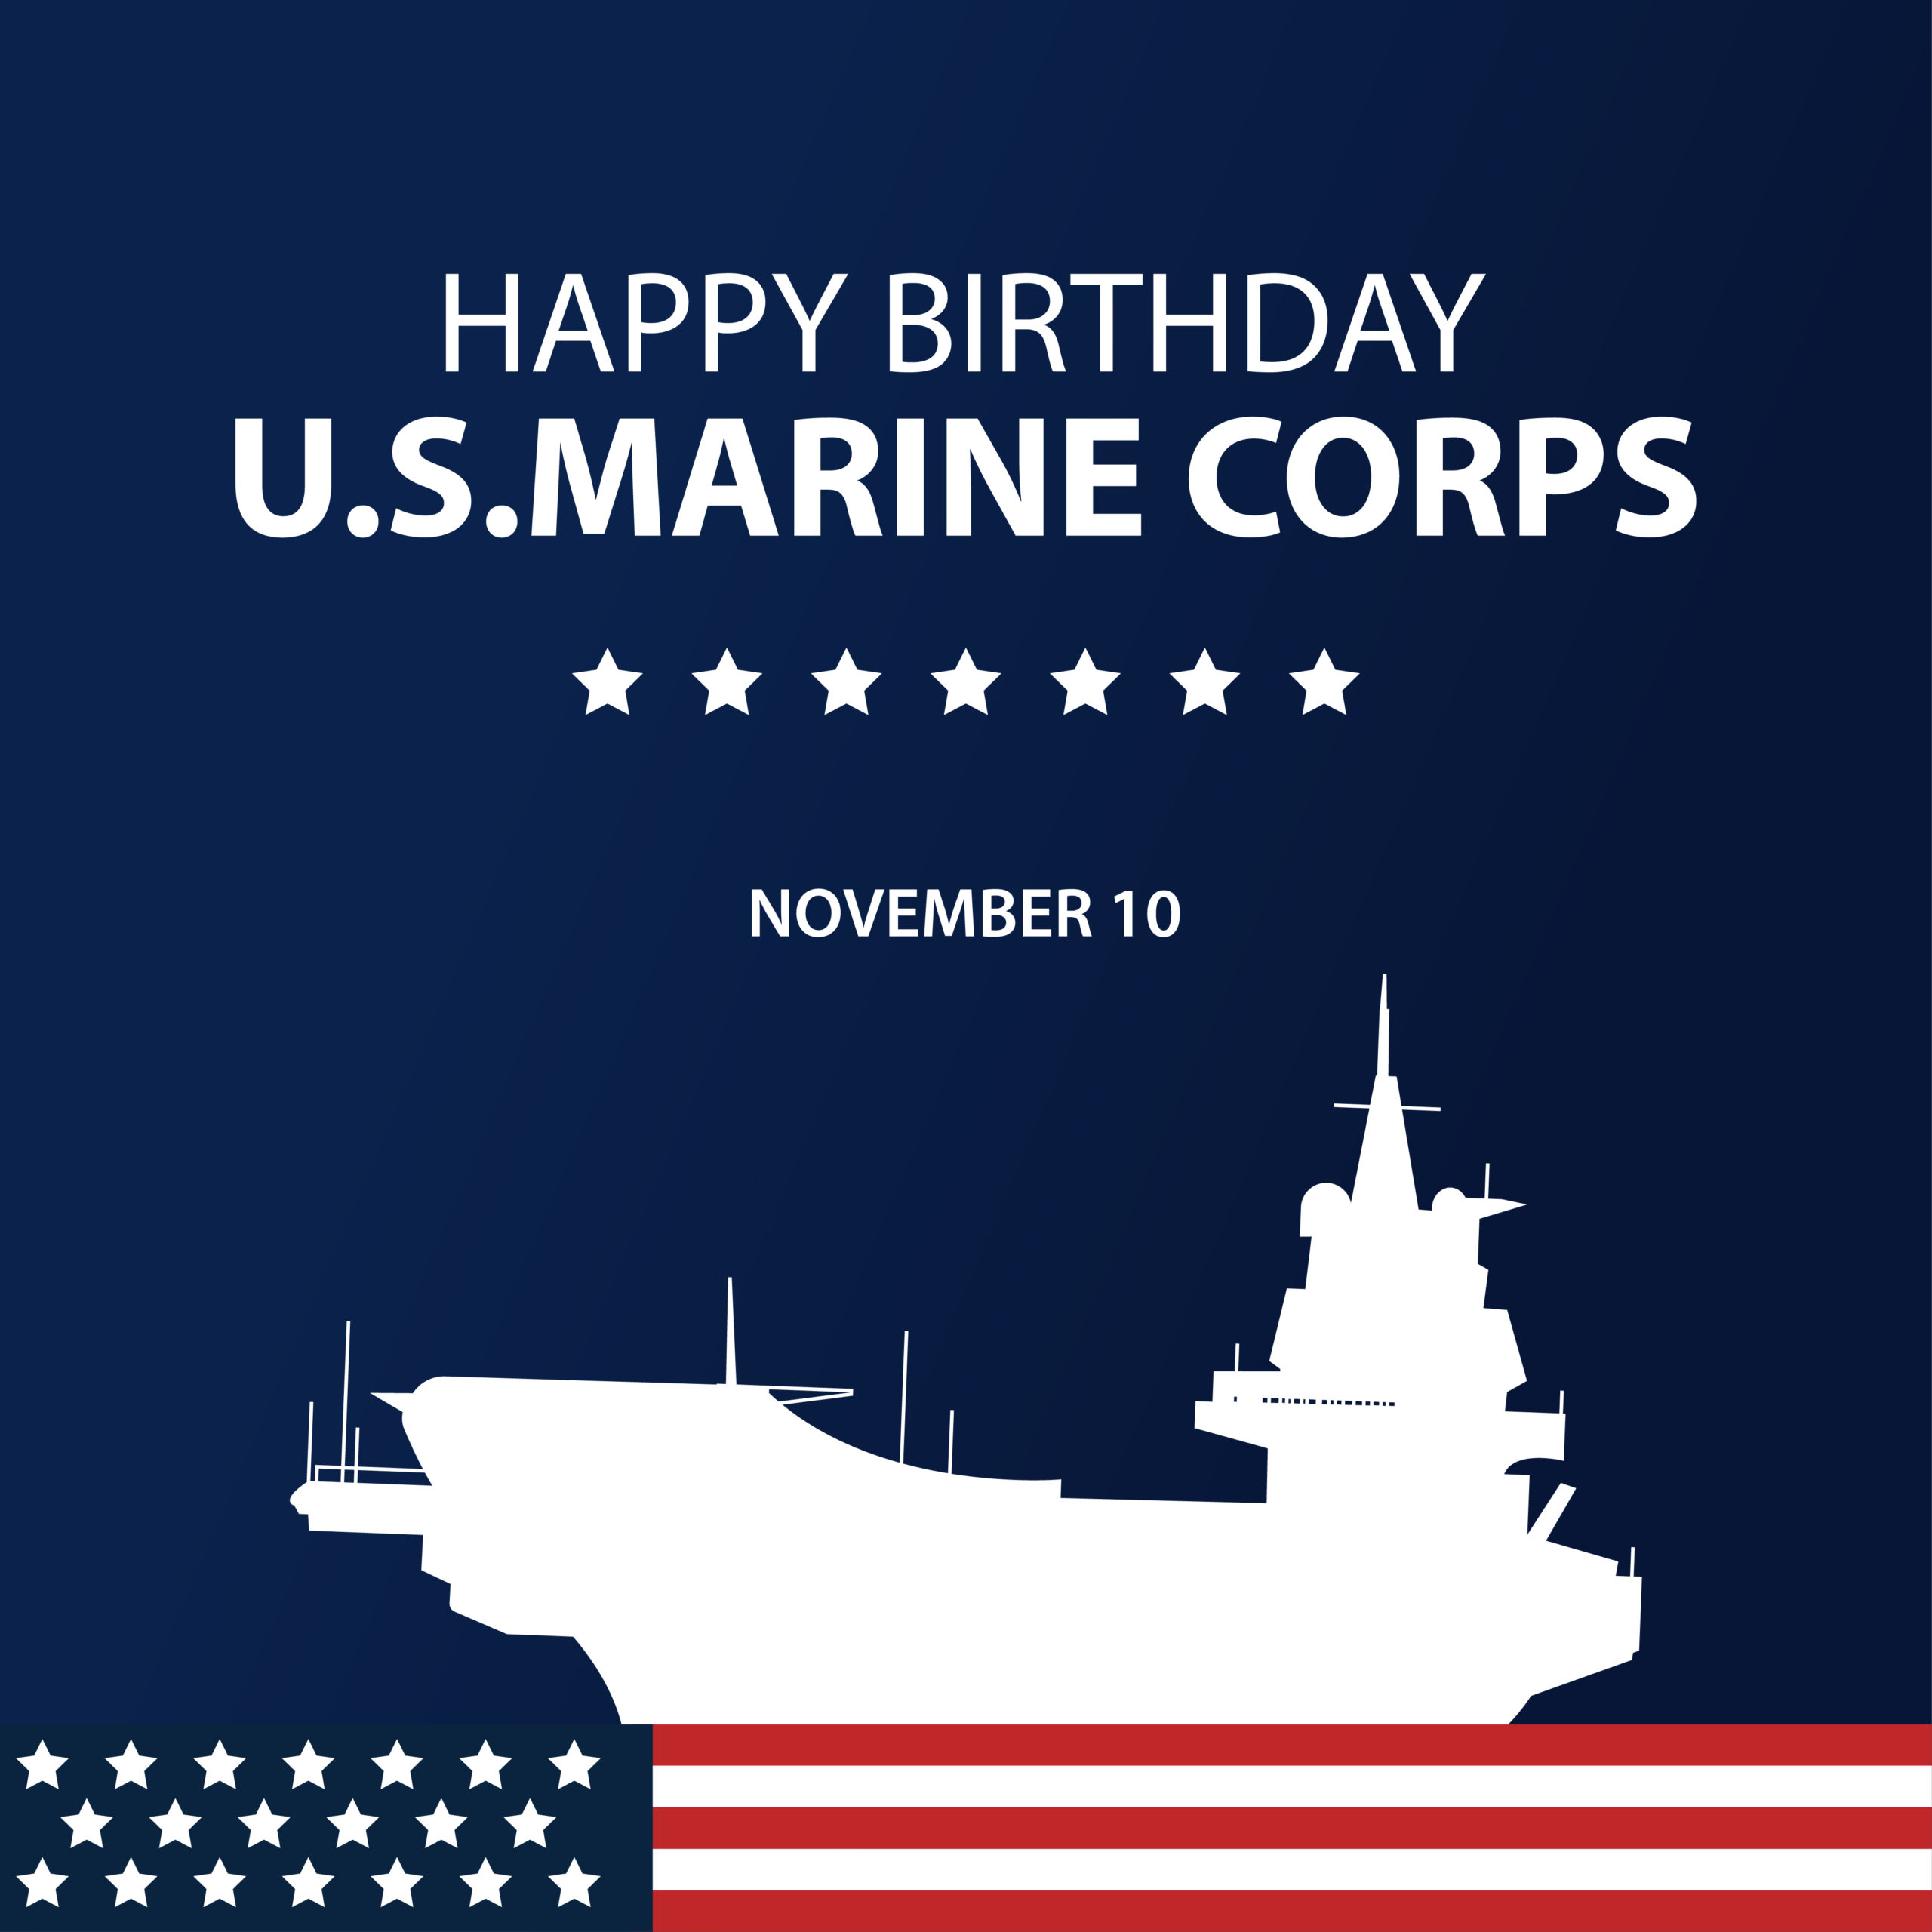 United States Marine Corps Birthday 2022: Wishes, Sayings, Messages,  Greetings, Funny Memes, Quotes, HD Images, and Instagram Captions to honor  the service of the maritime land force service branch of the United